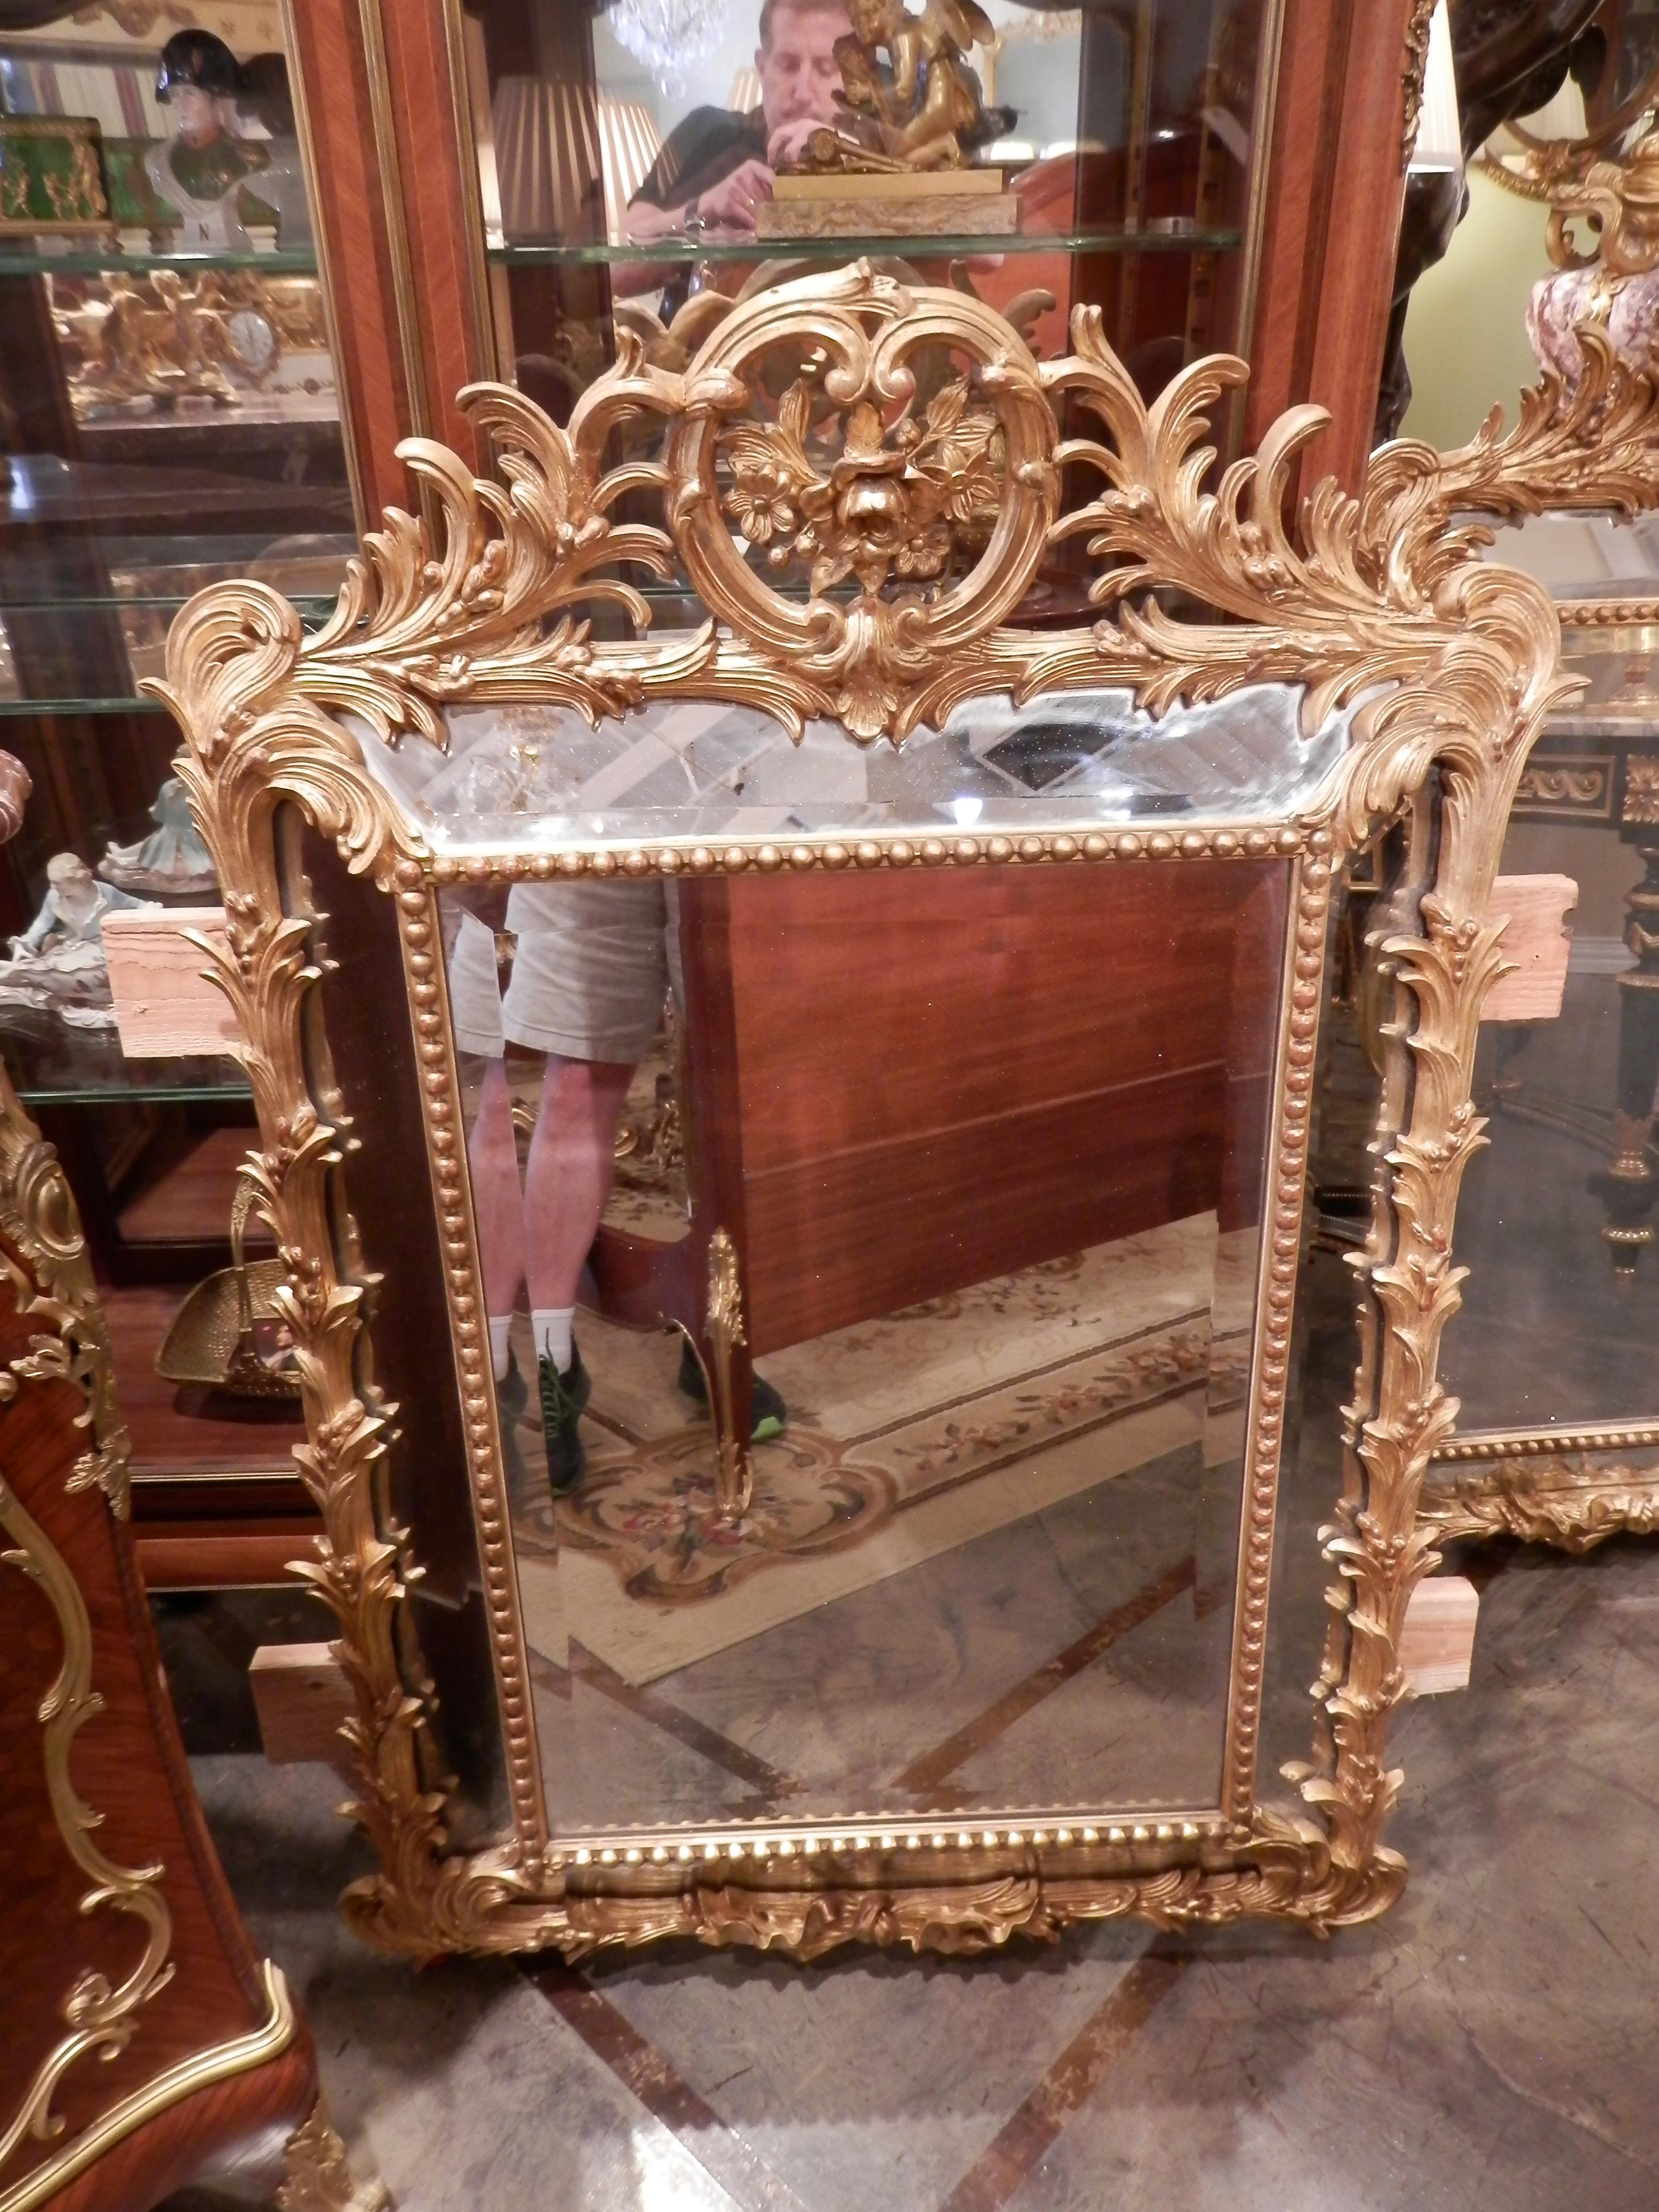 A beautiful pair of 19th century finely carved French gilt carved Louis XV mirrors. Double beveled with fine carved flowers and acanthus leaf design. Beaded trim. All original.